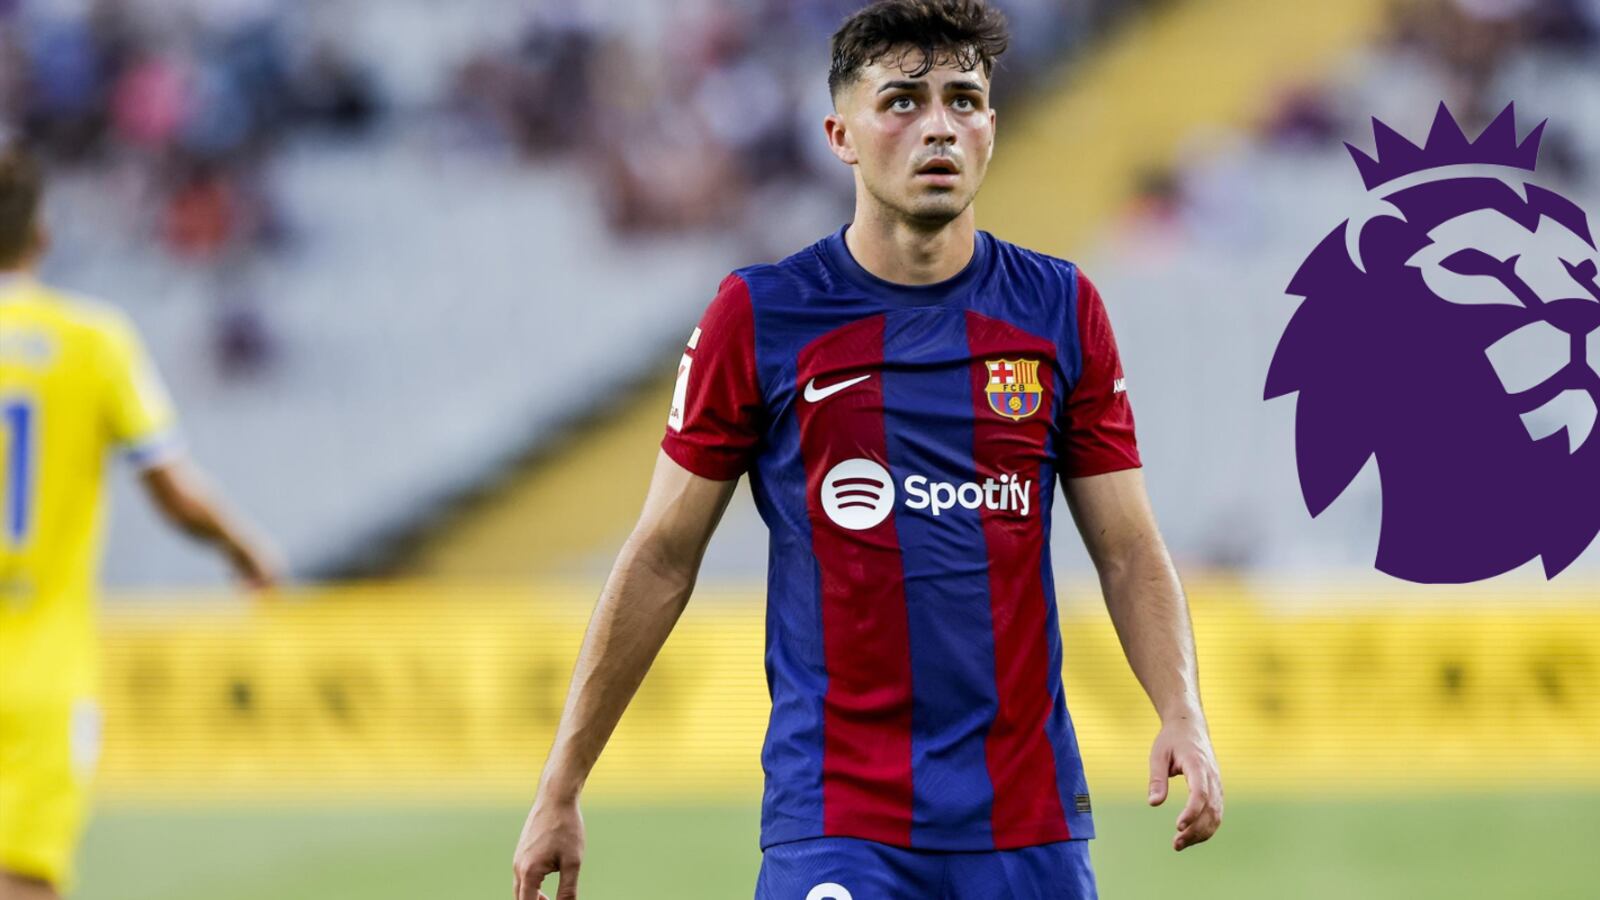 Barcelona puts a price on Pedri that would aim for a move to the Premier League